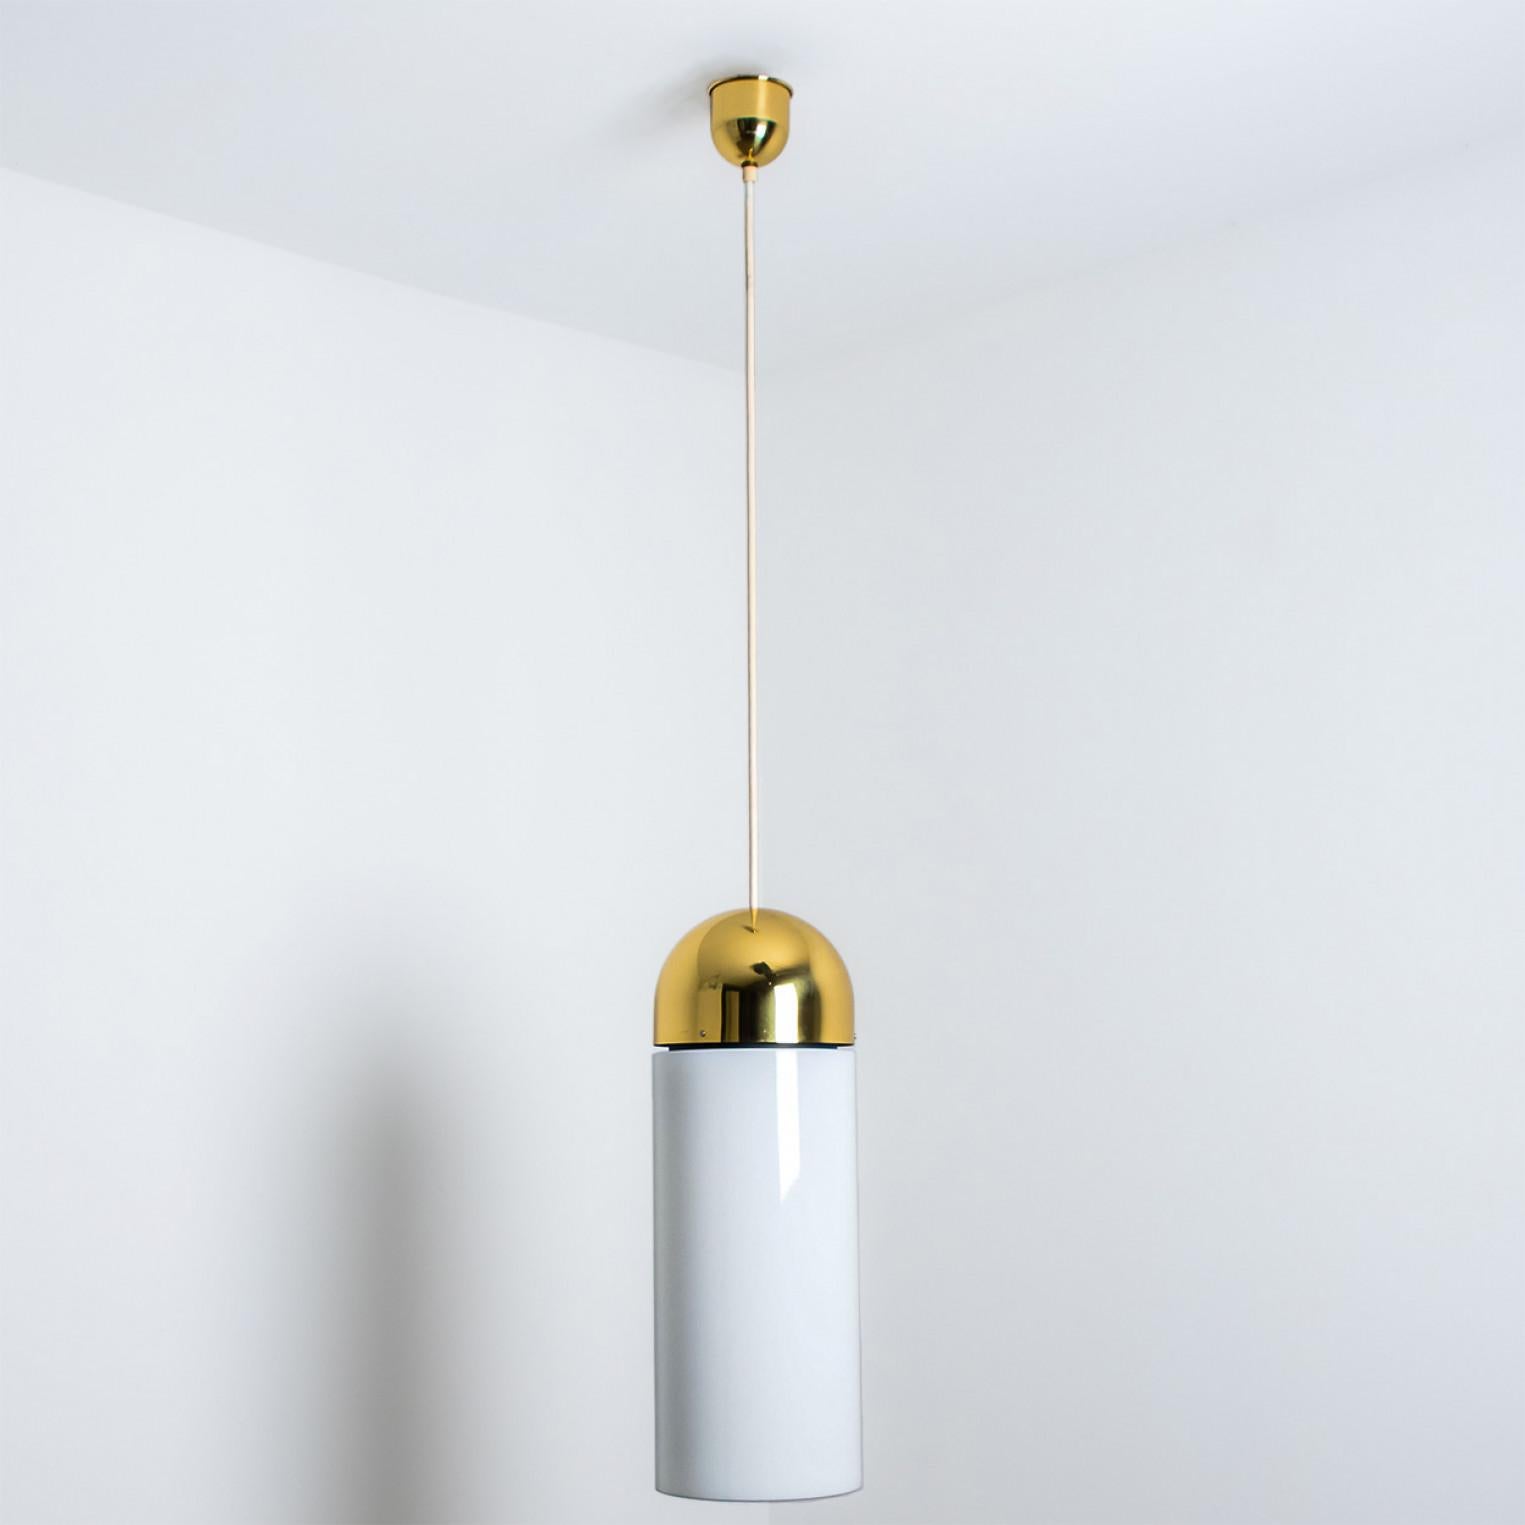 A wonderful round brass chandelier, circa 1970, made by Glashütte Limburg, Germany.
With thick hand-blown white glass with a brass top and a cylinder-like structure. Illuminates beautifully. Hig-end pieces form Germany.

Dimensions:
Diameter: 8.66